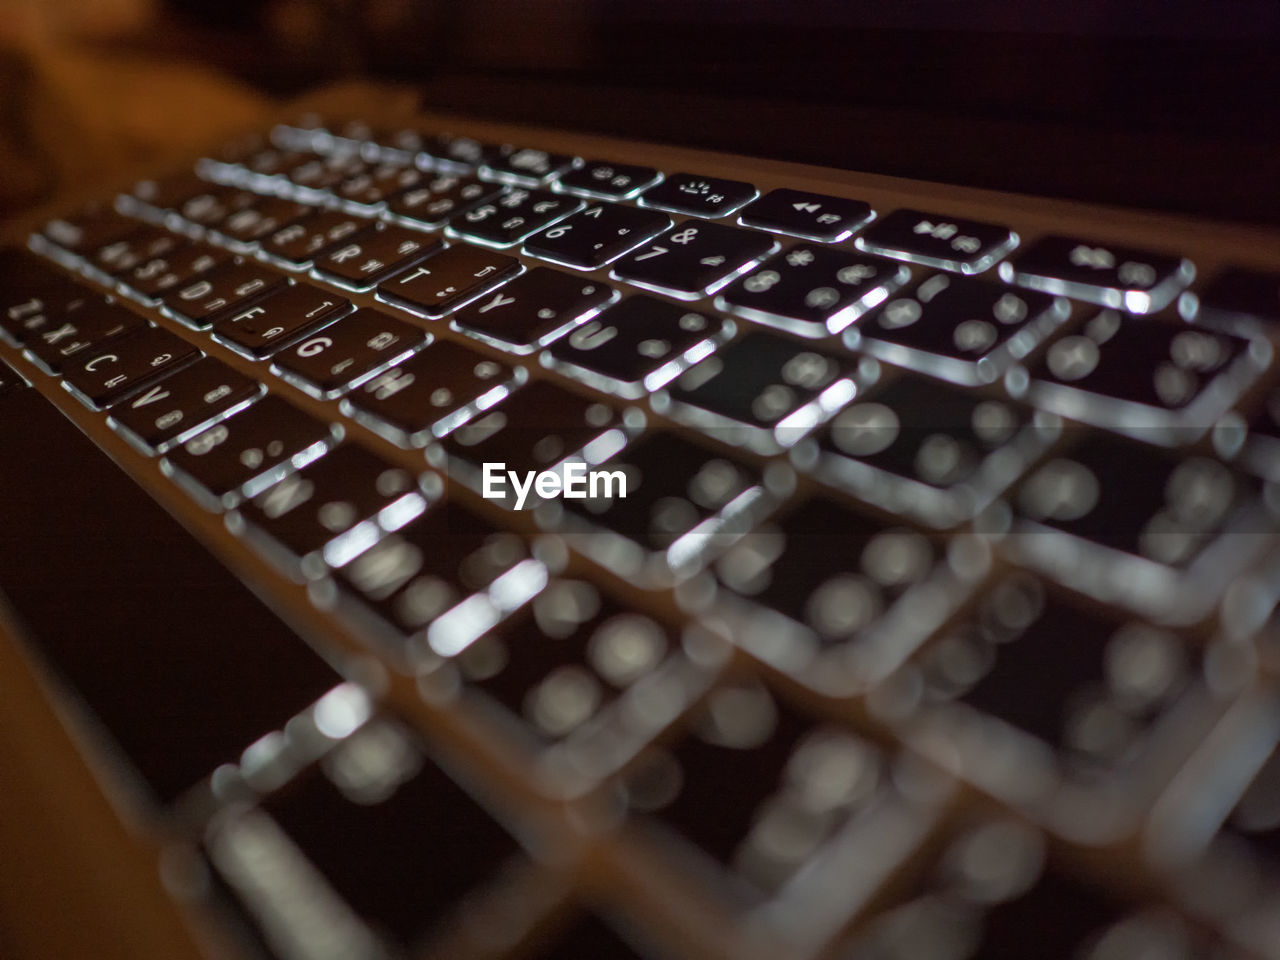 CLOSE-UP OF LAPTOP ON KEYBOARD